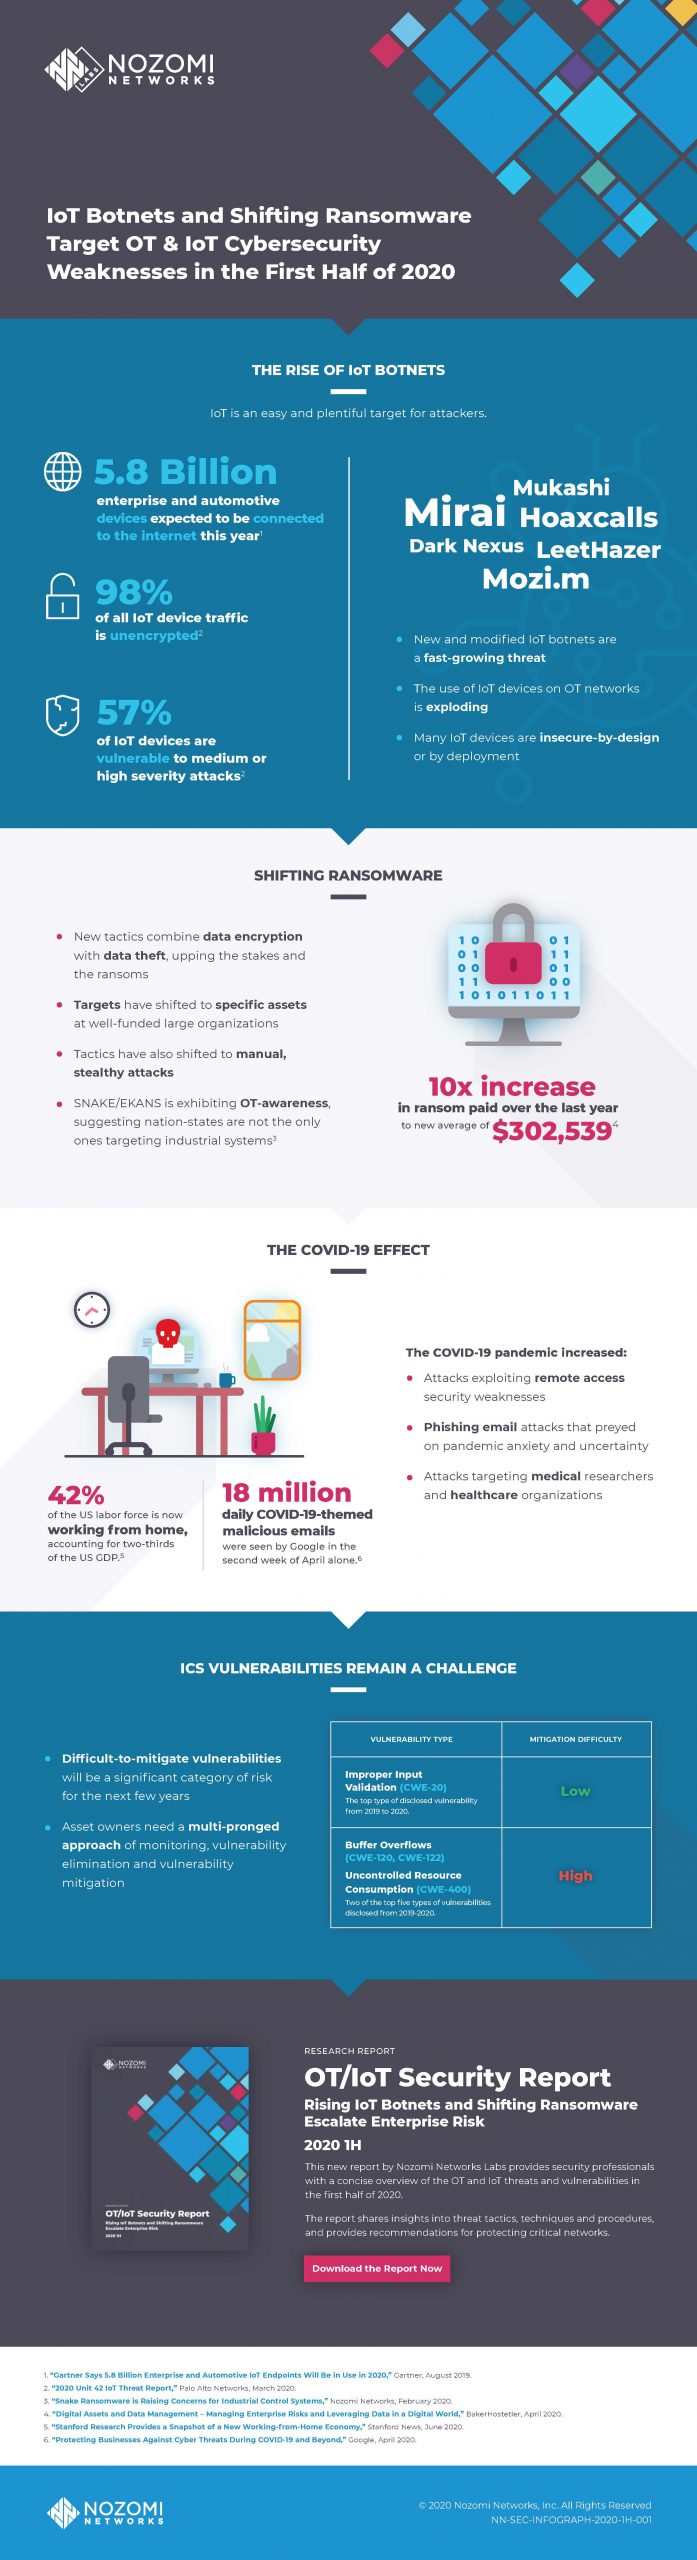 nozomi networks ot iot security infographic 2020